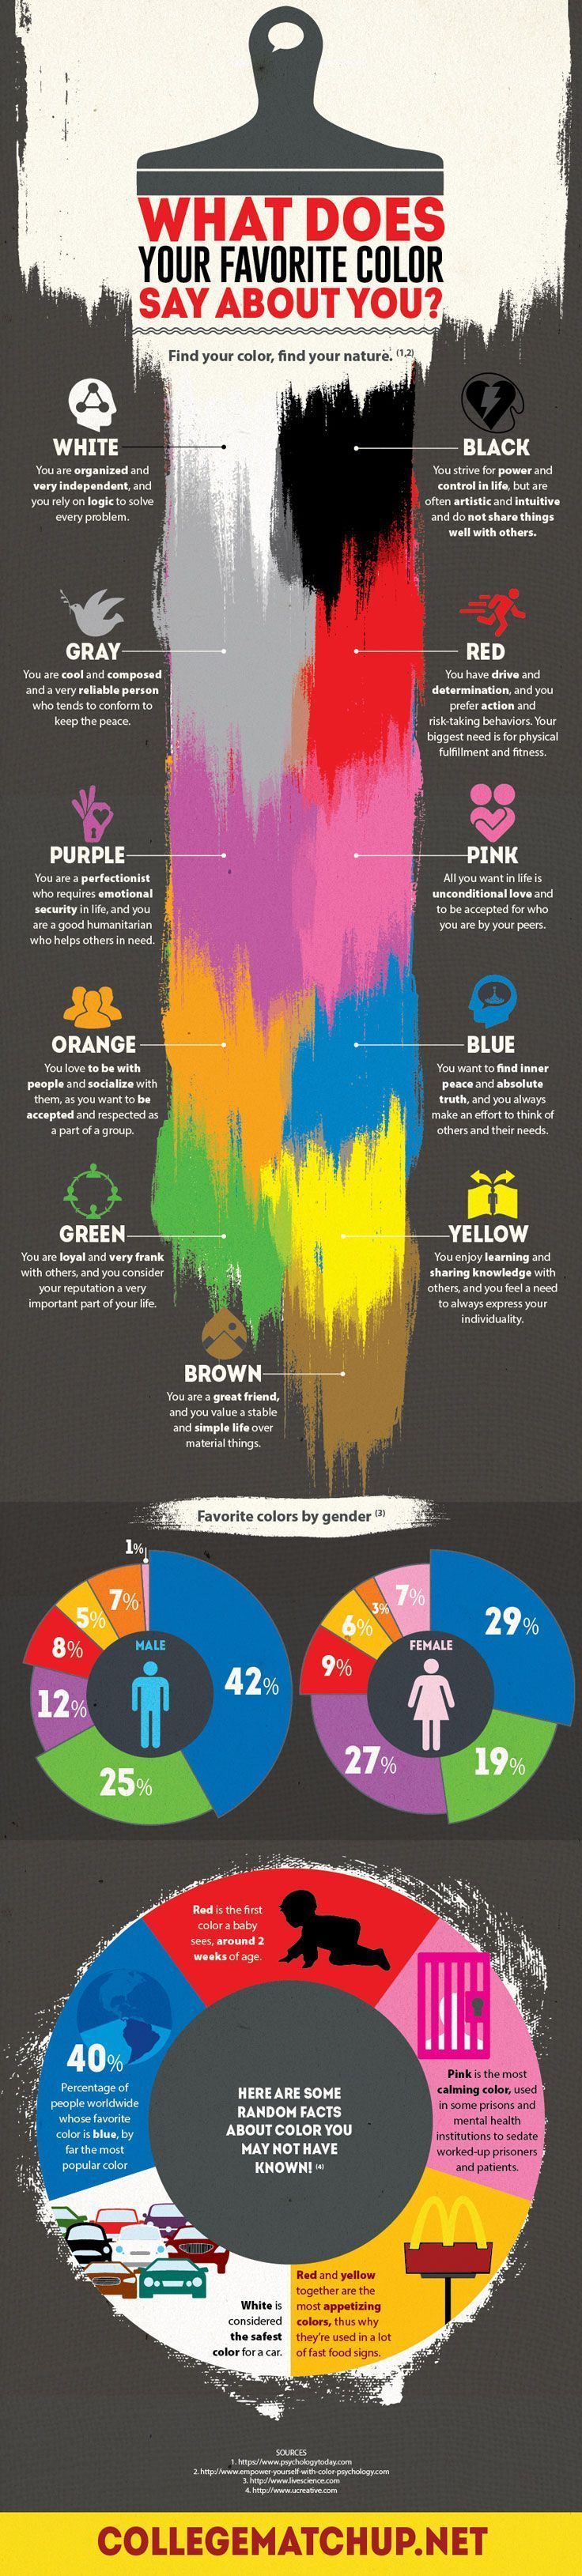 1531969086_772_Marketing-Infographic-Got-a-favorite-color-Well-what-does-your-favorite-color-say-about-you-Check-t Marketing Infographic : Got a favorite color? Well, what does your favorite color say about you? Check t...